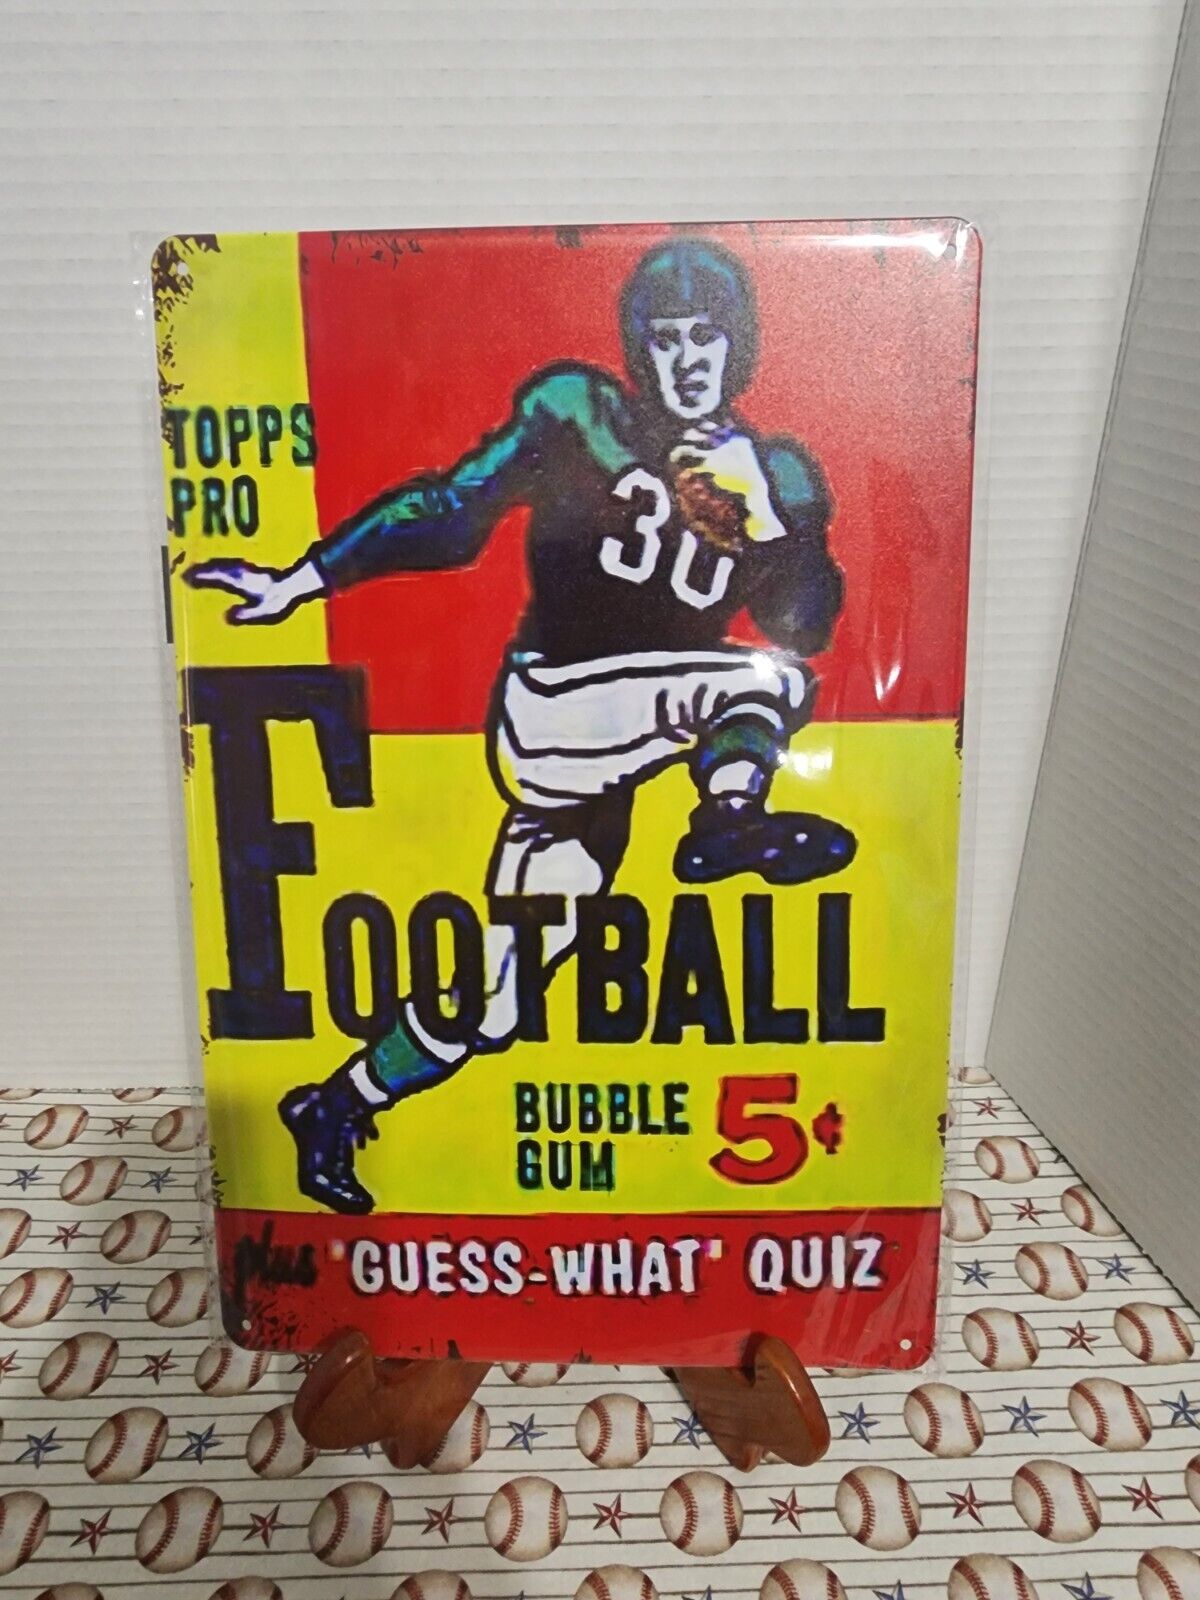 Topps Football Trading Cards - Vintage Reproduction Tin Sign - Man Cave